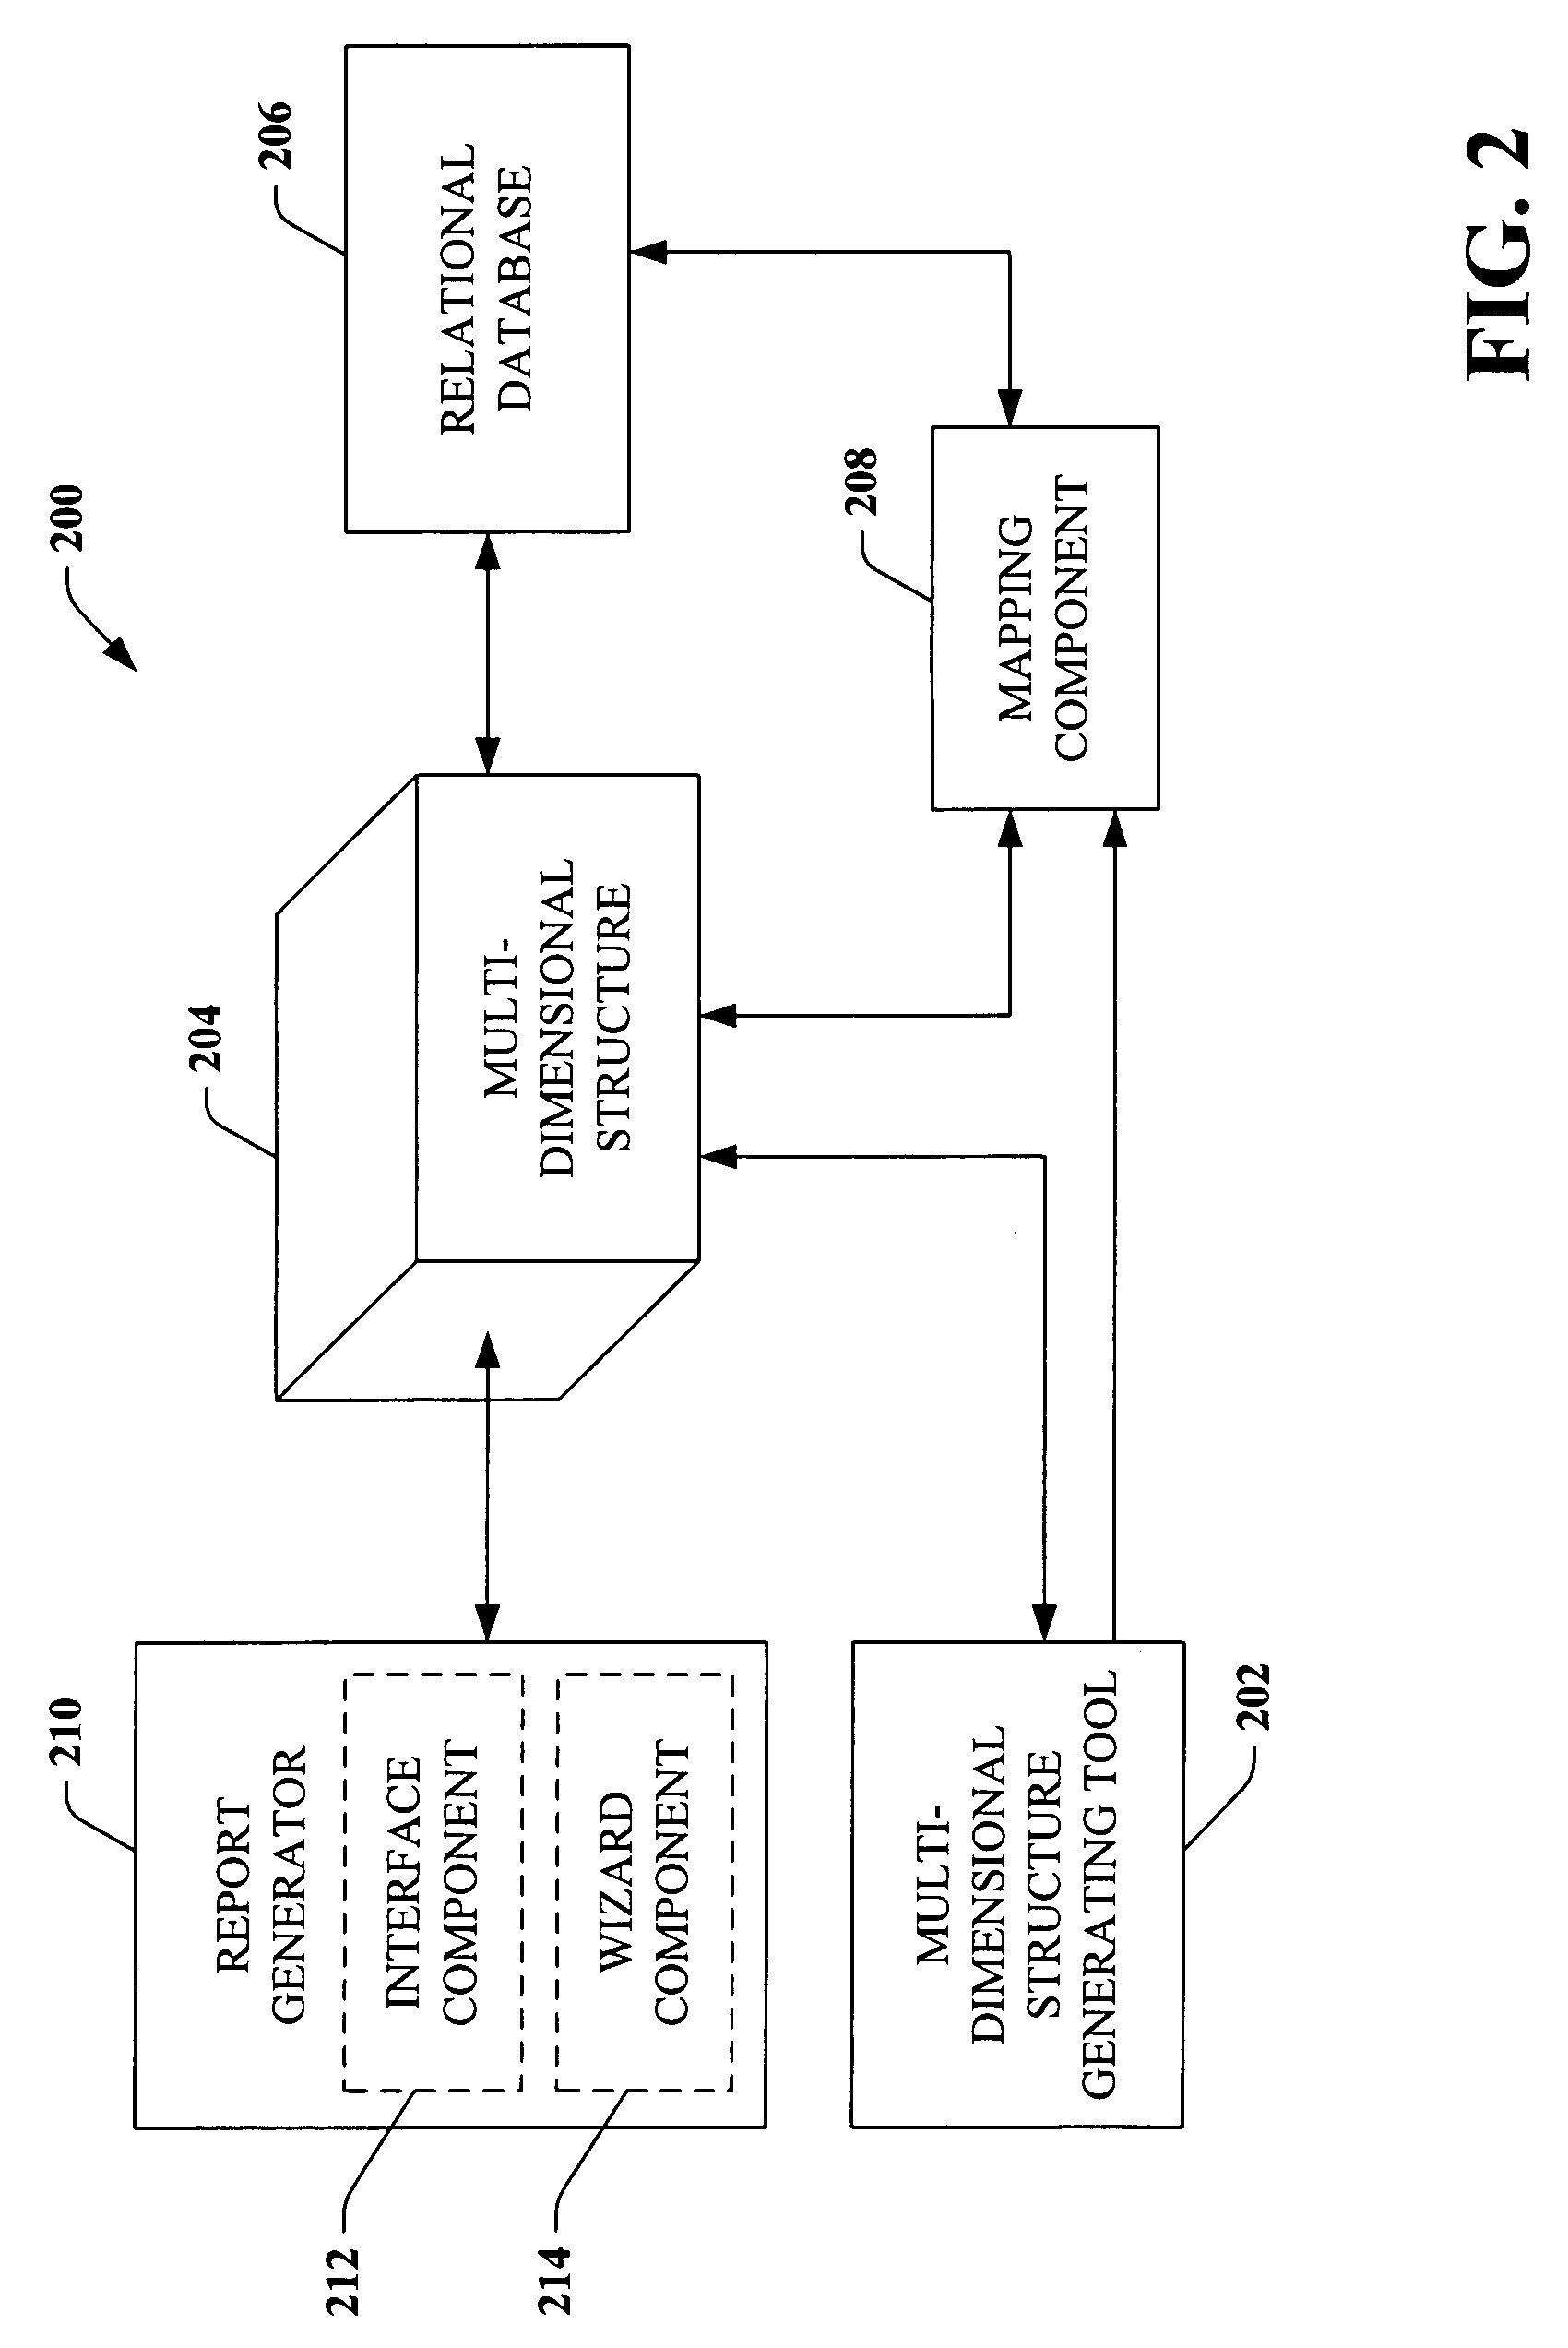 Relational reporting system and methodology